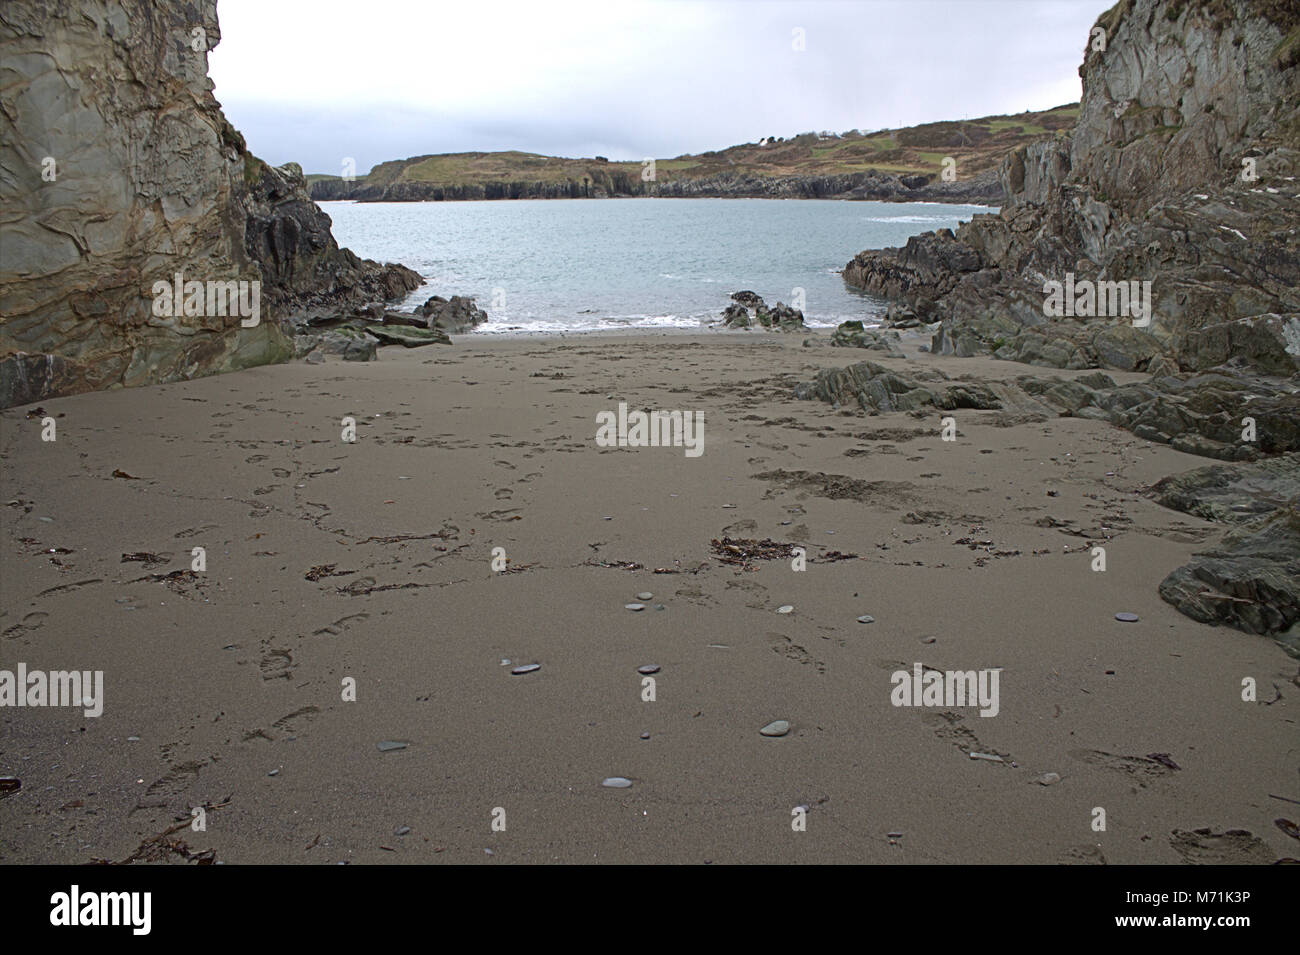 Footprints in the sand of a quiet sandy cove, on the coast of West Cork, Ireland. Stock Photo